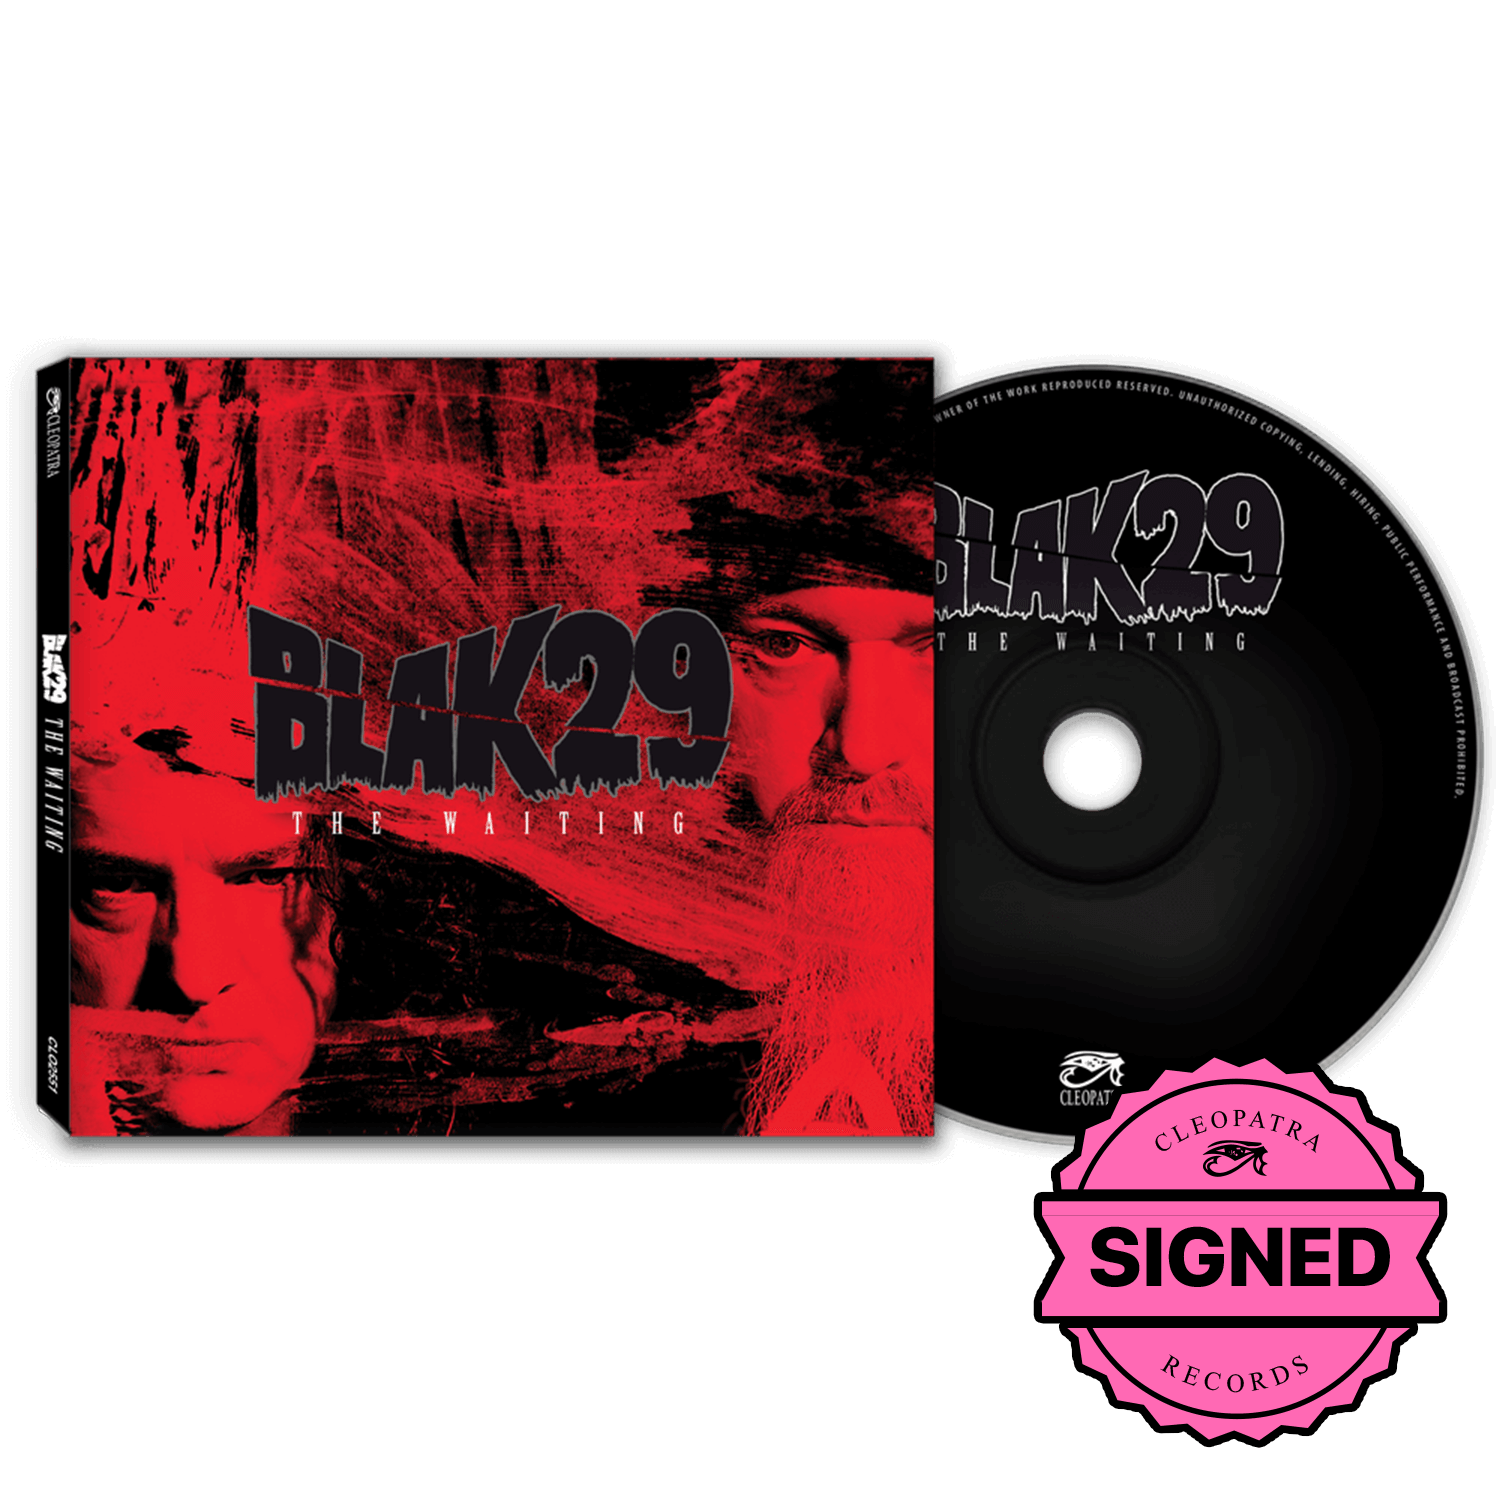 Blak29 - The Waiting (CD - Signed by Steve Zing)